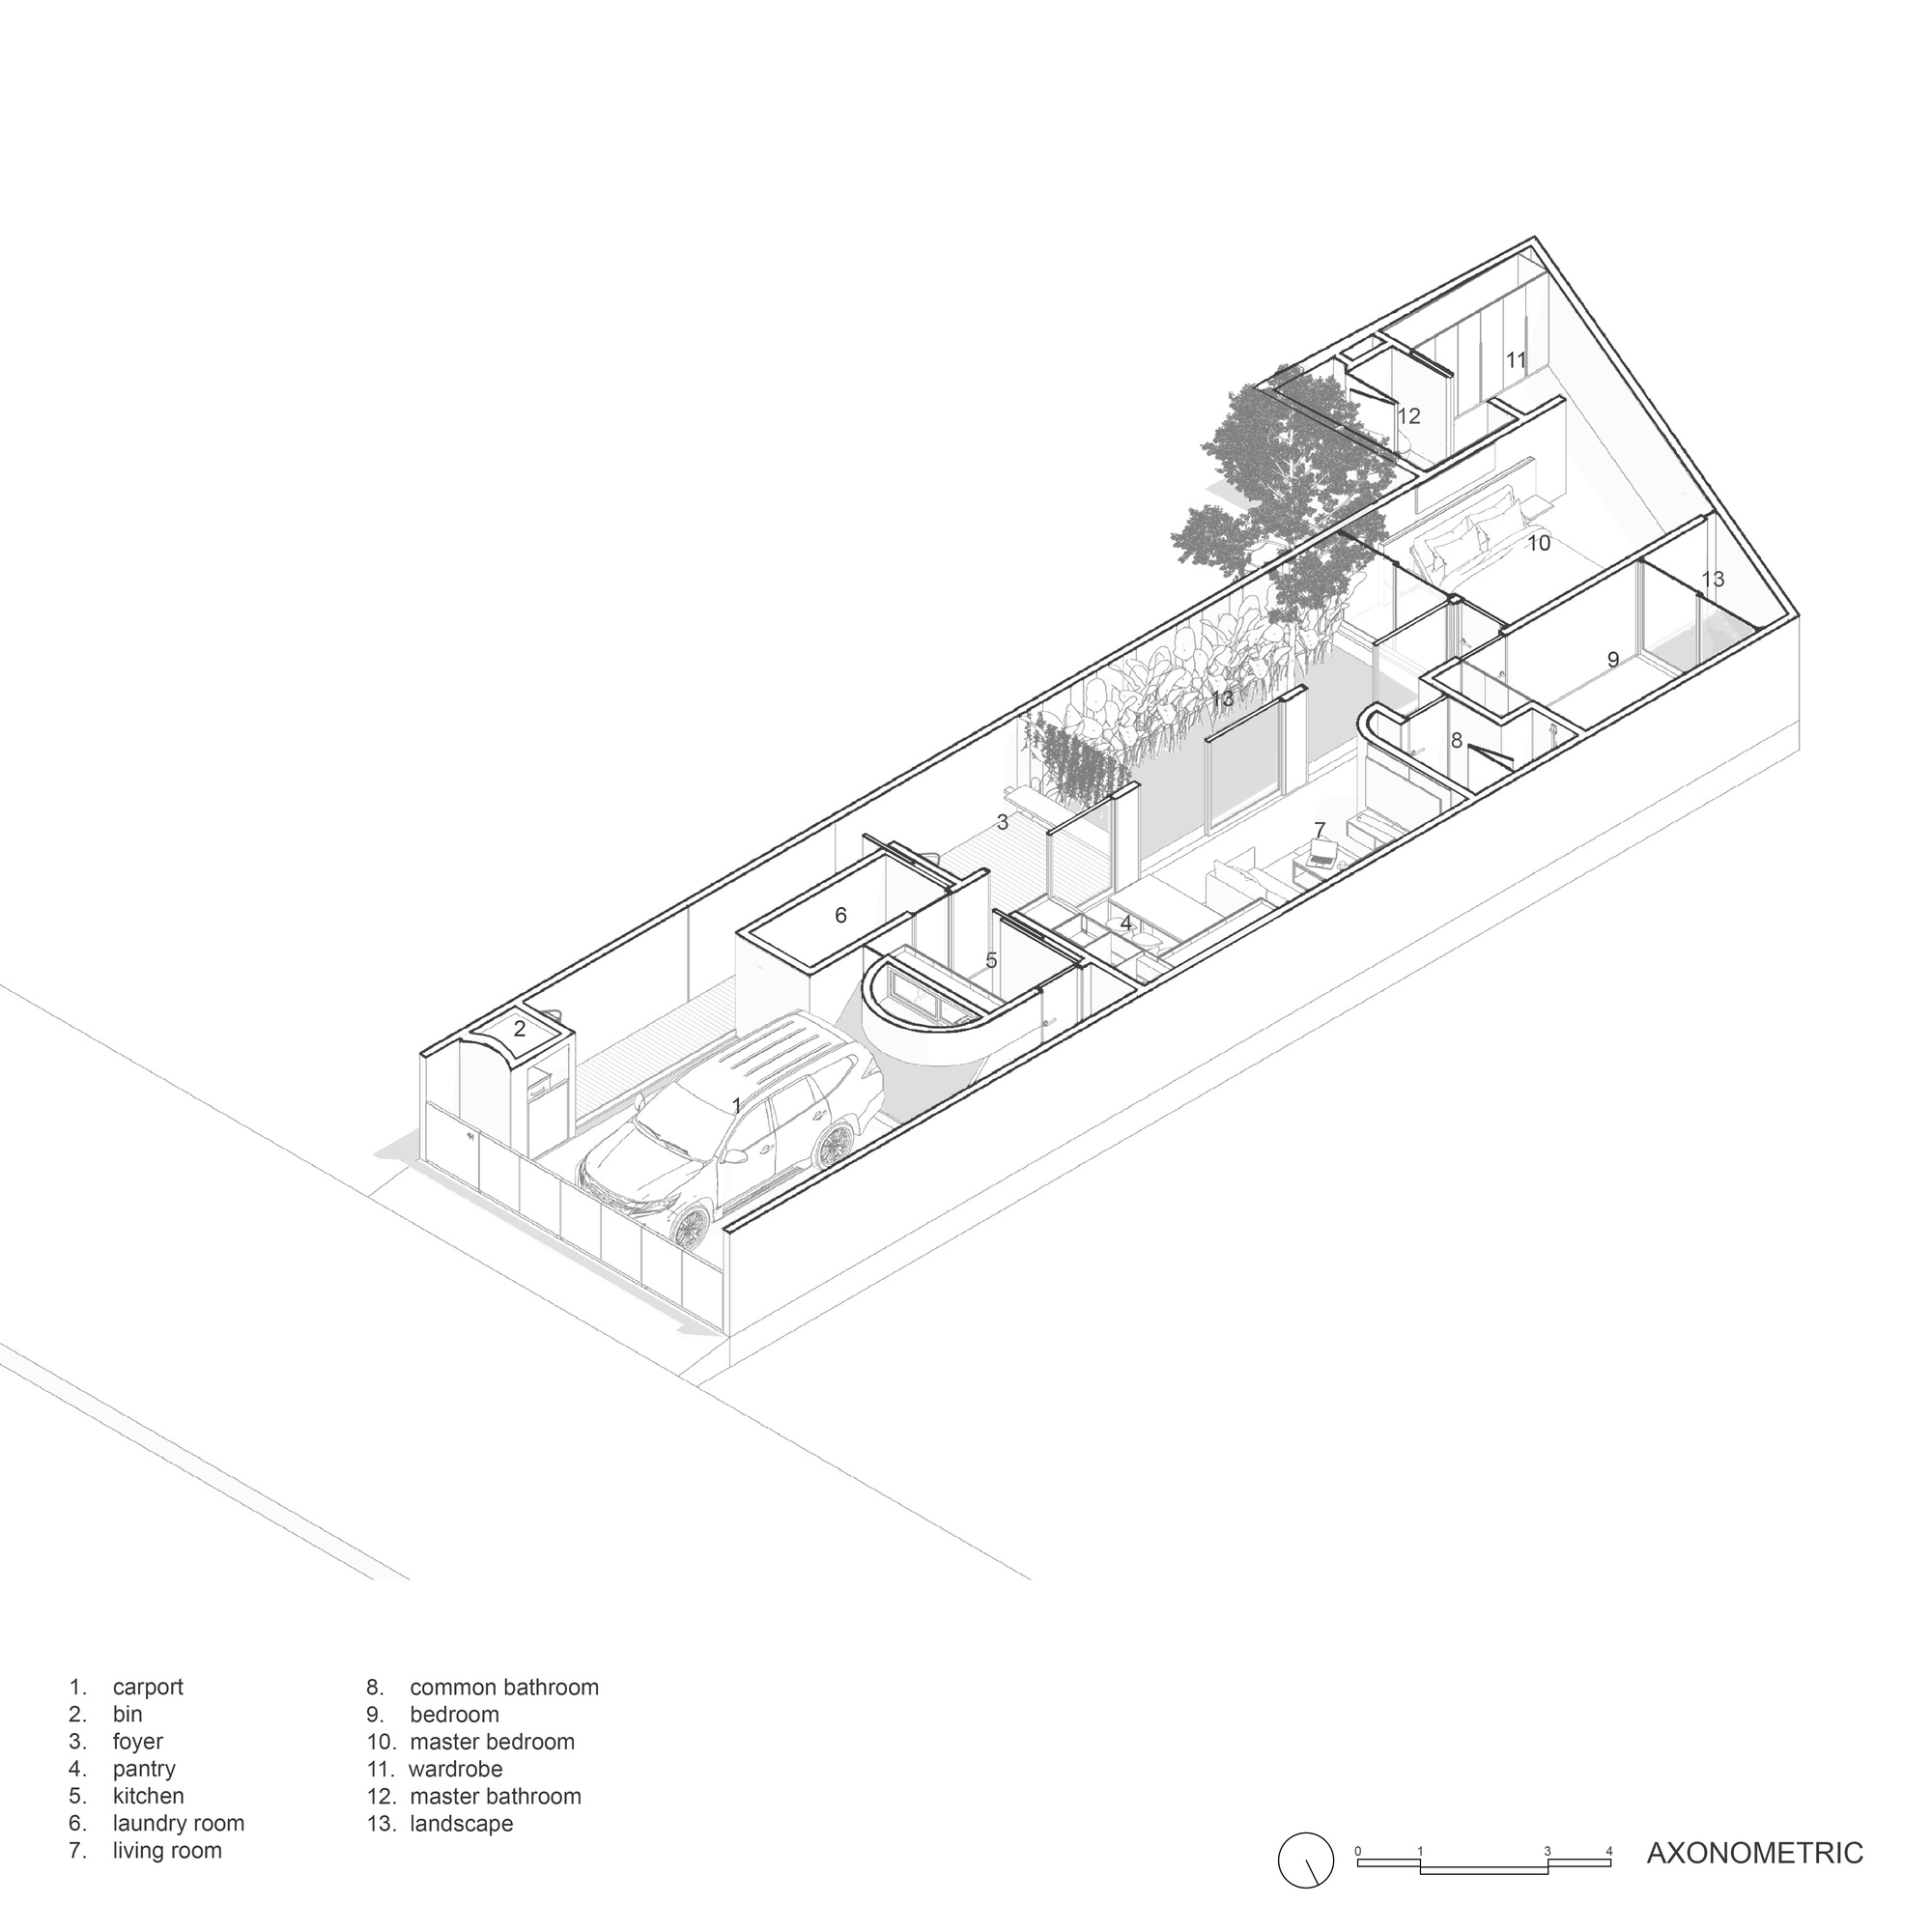 Plan of YD House by Isso Architects